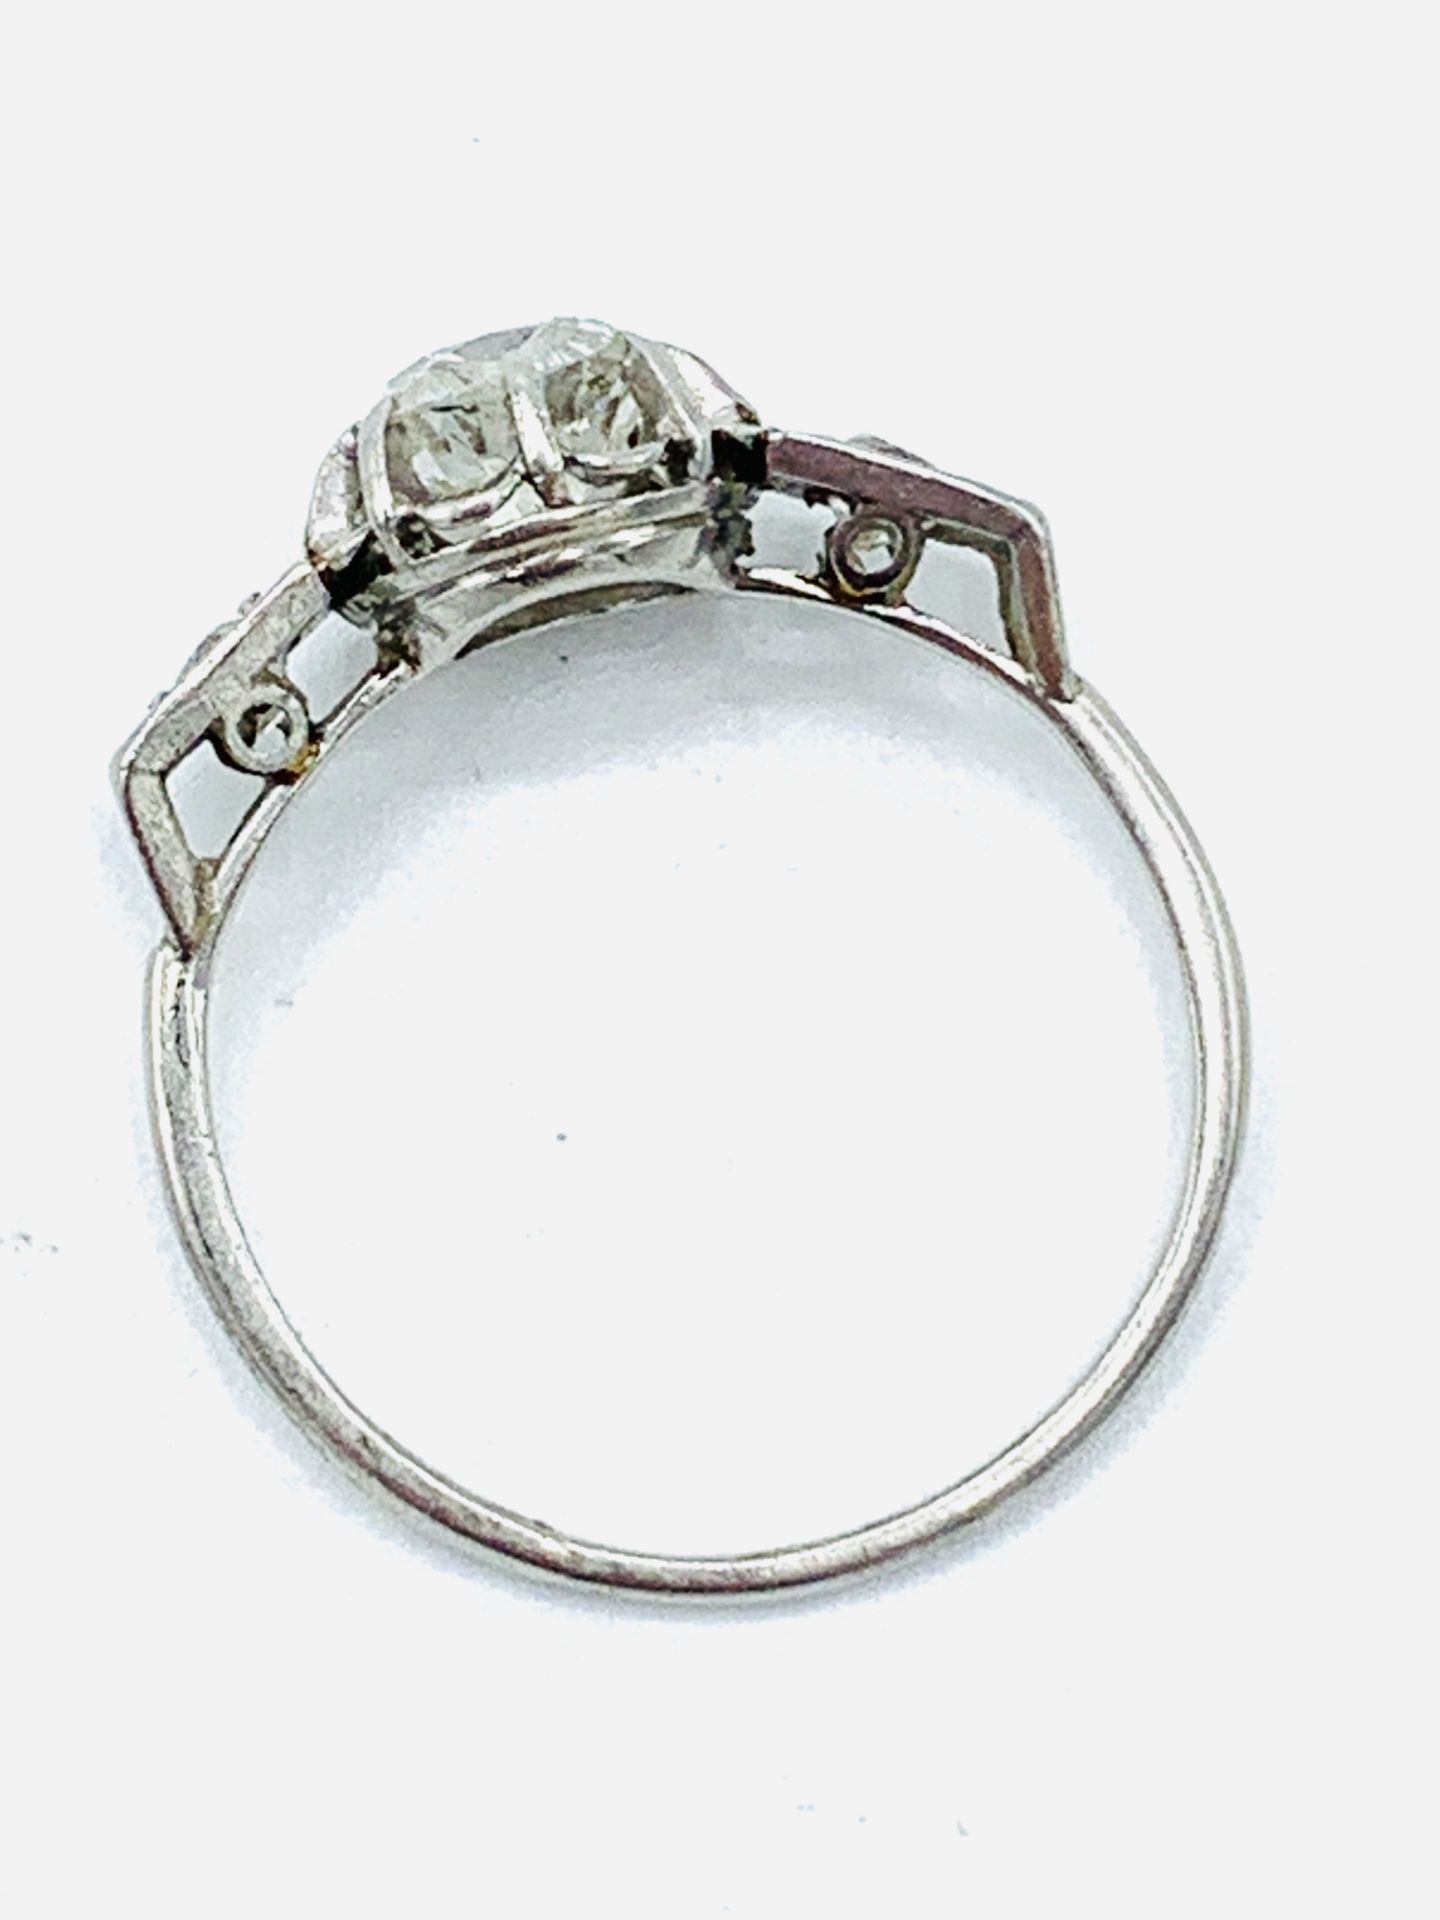 18ct white gold single stone diamond ring with diamond shoulders - Image 8 of 8